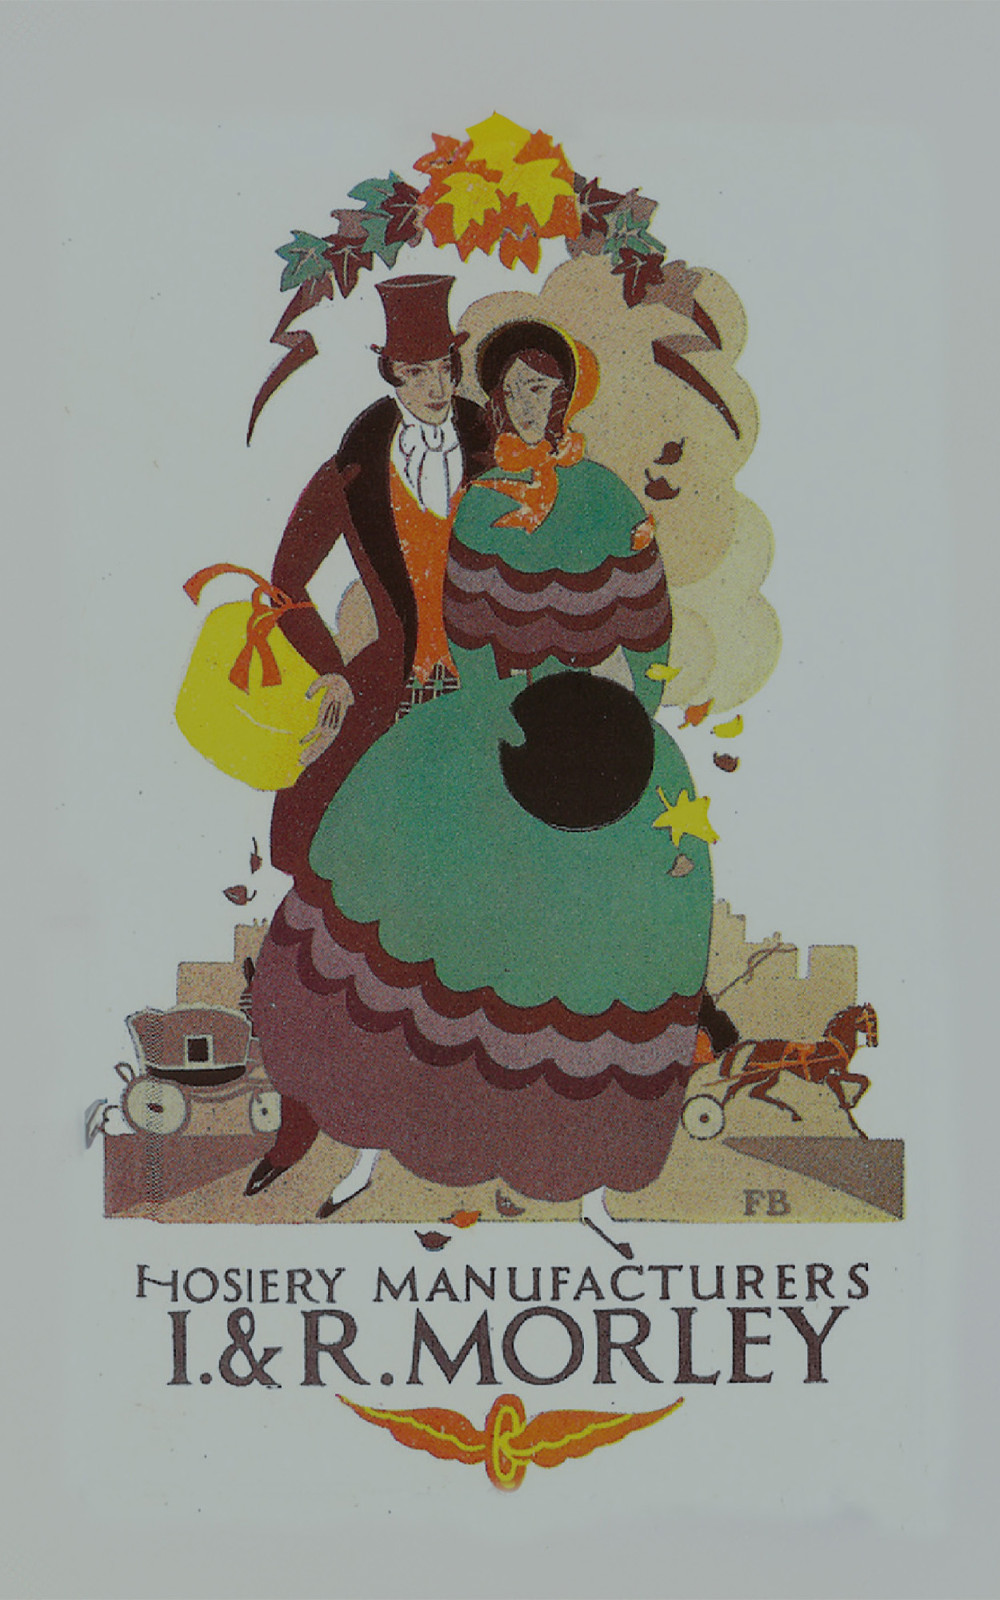 I & R Morley Hosiery Manufacturers booklet cover.